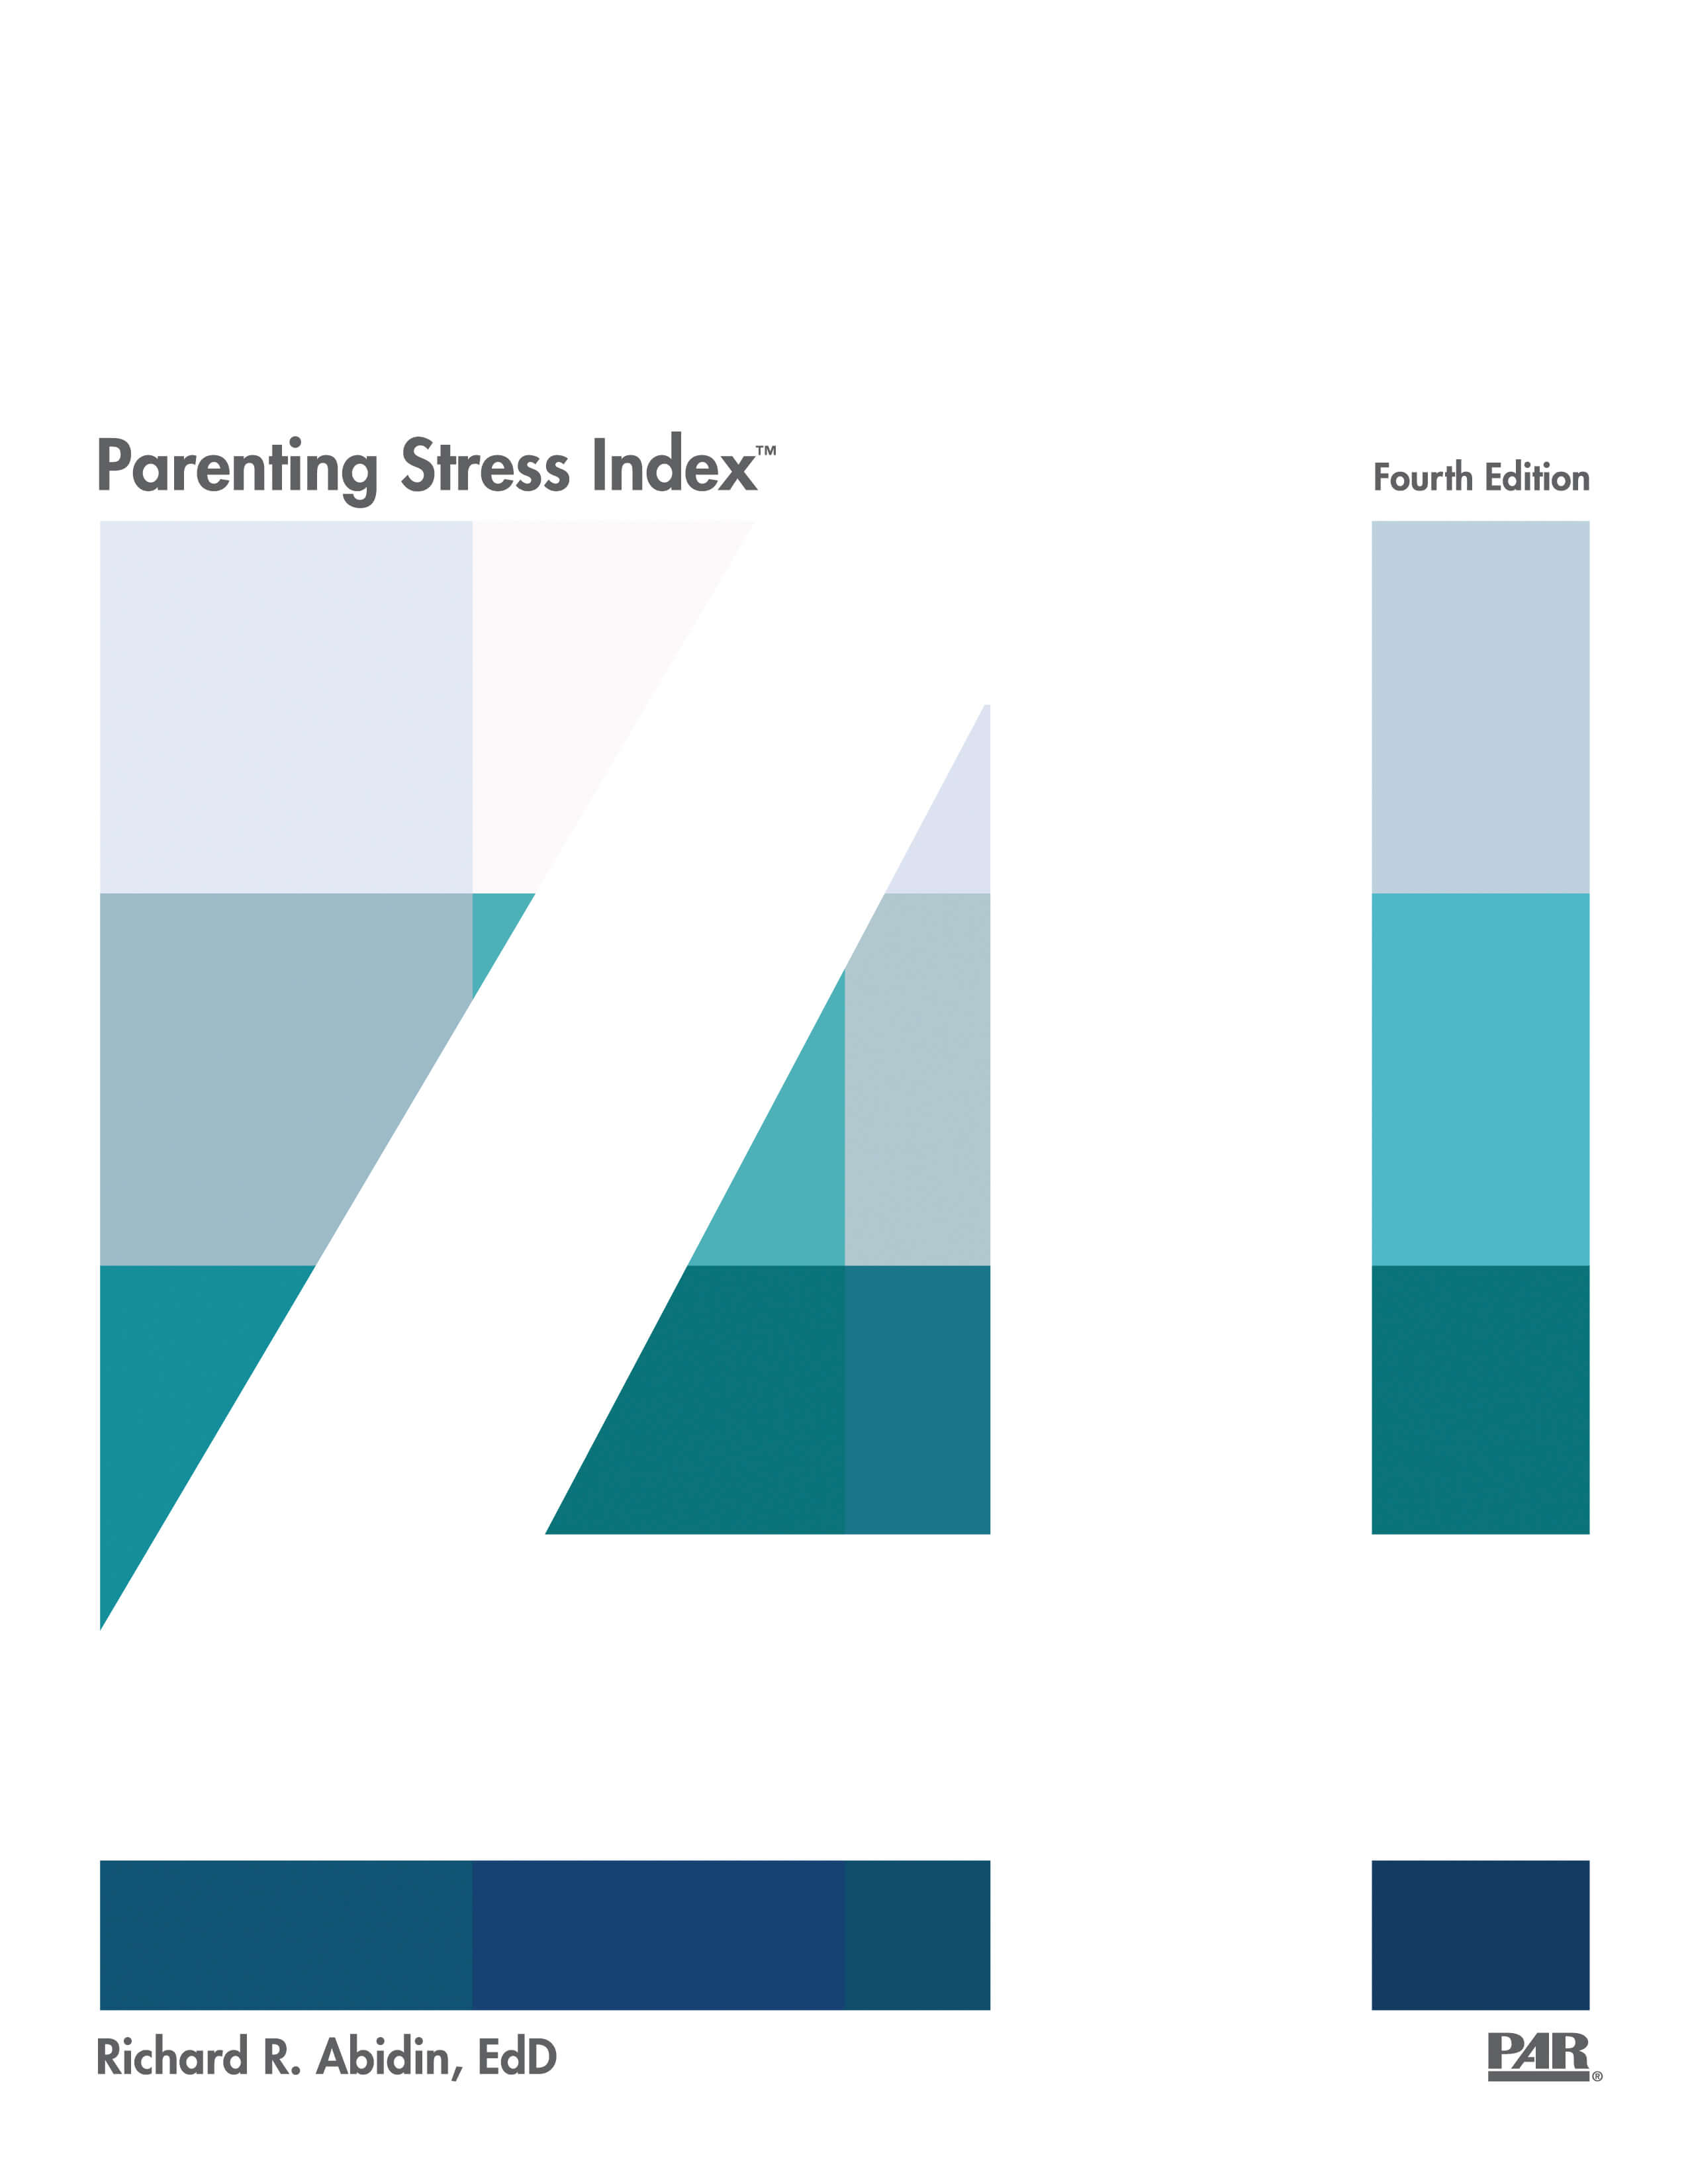 Parenting Stress Index™, Fourth Edition Short Form - 